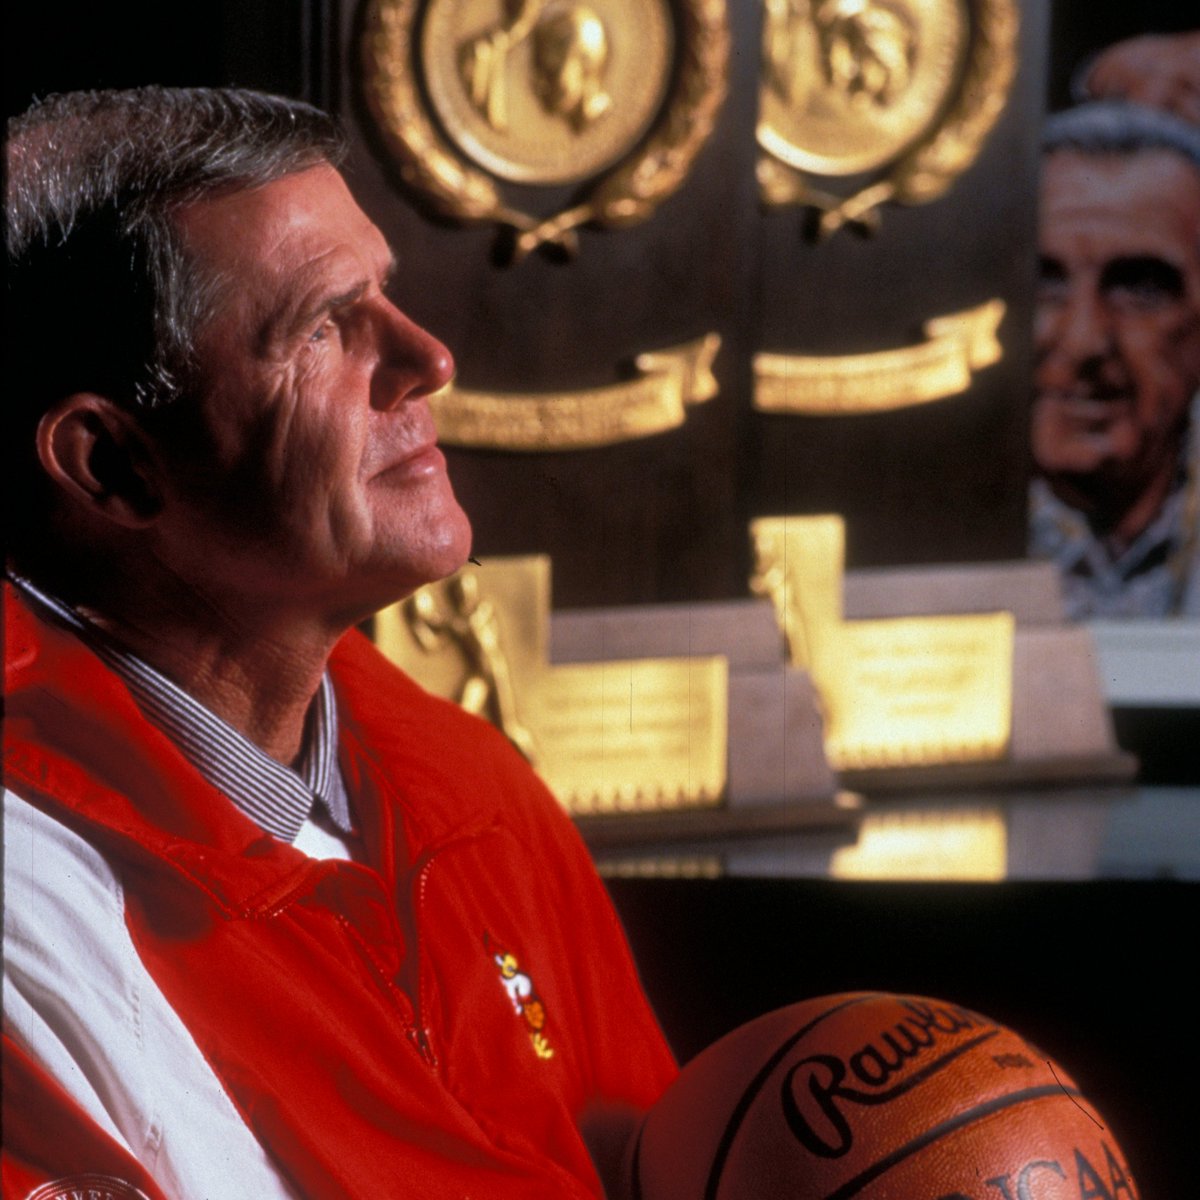 We continue to honor the life and legacy of the legendary Denny Crum ❤️ Consider making a donation to the Denny Crum Scholarship Fund today. Give: give.louisville.edu/Crum #GoCards